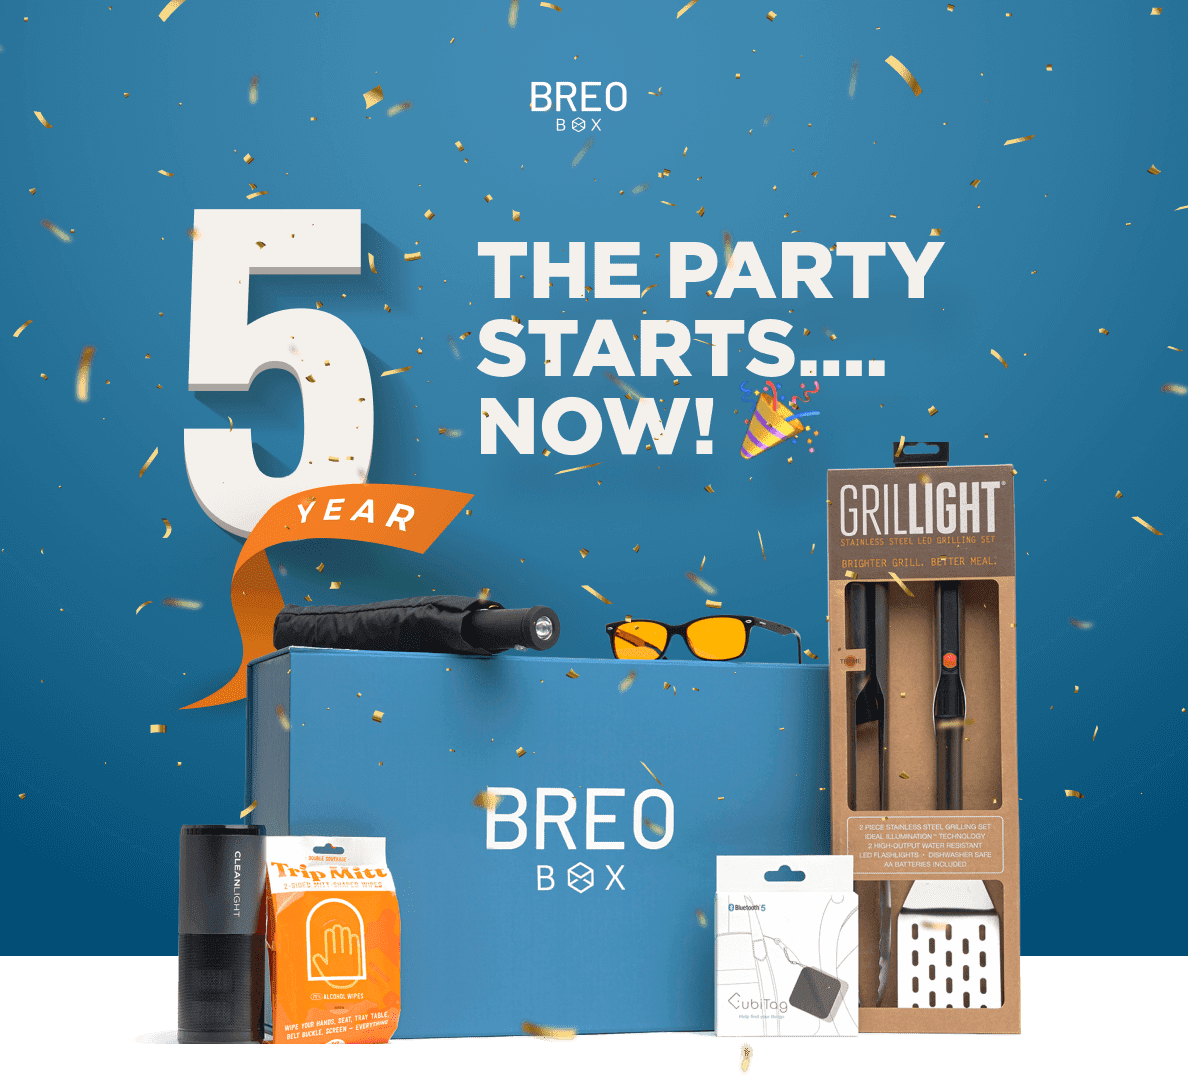 Breo Box 5th Anniversary Flash Sale: $50 Off OR FREE Gift - TODAY